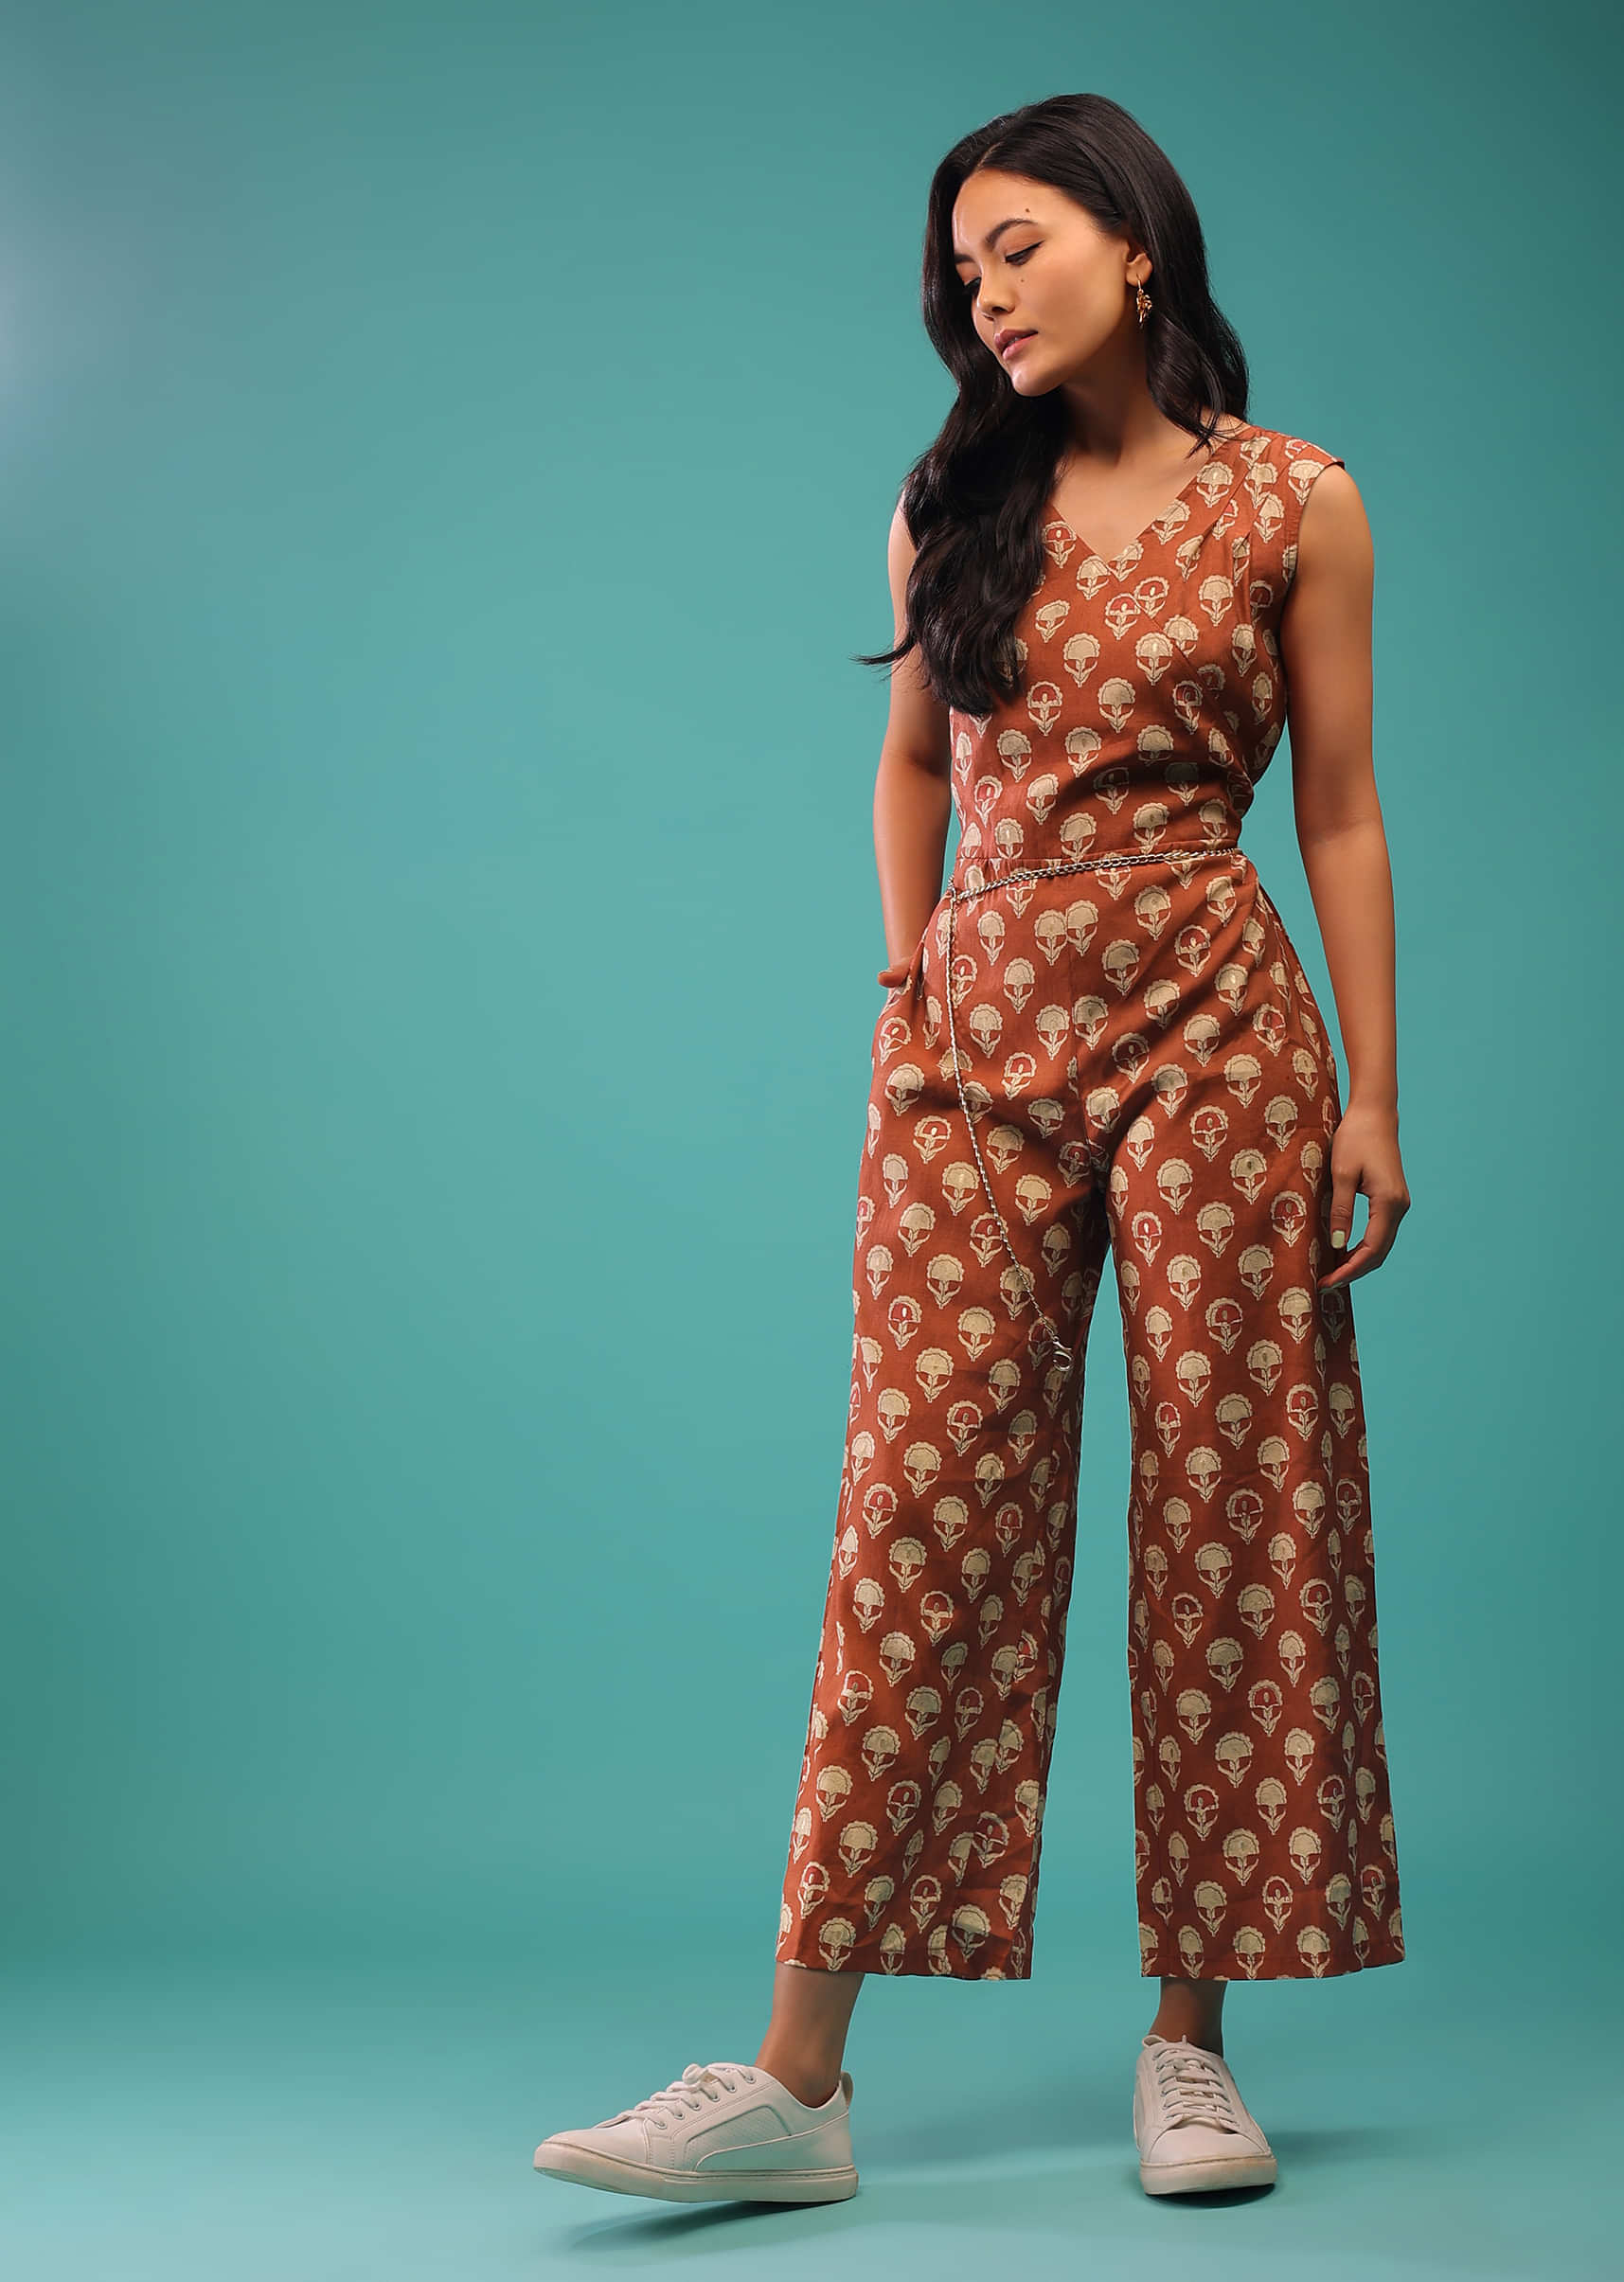 Rust Brown Jumpsuit With Floral Prints And Waist Belt